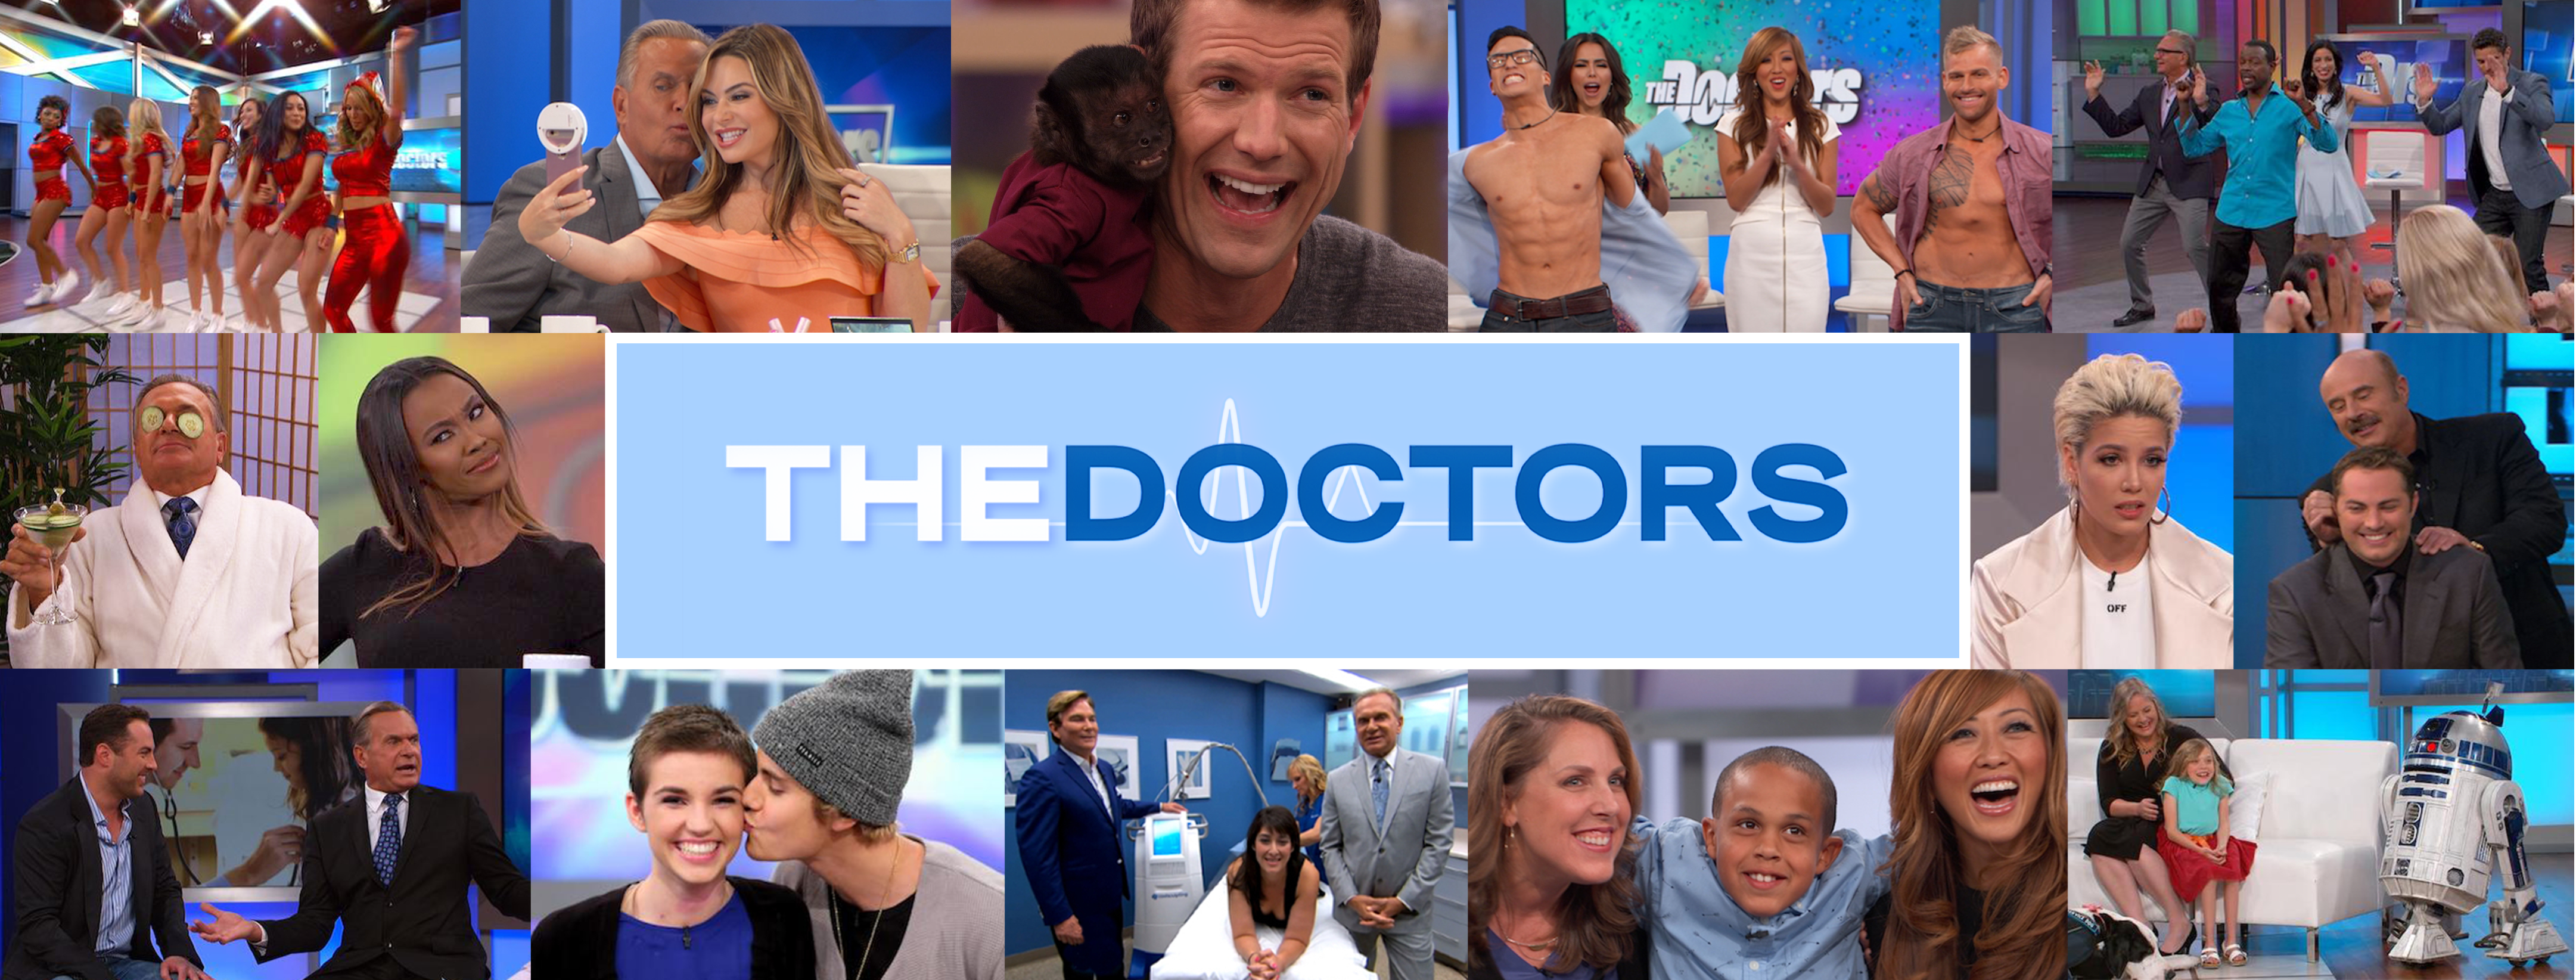 A New, More Natural Breast Implant? | The Doctors TV Show